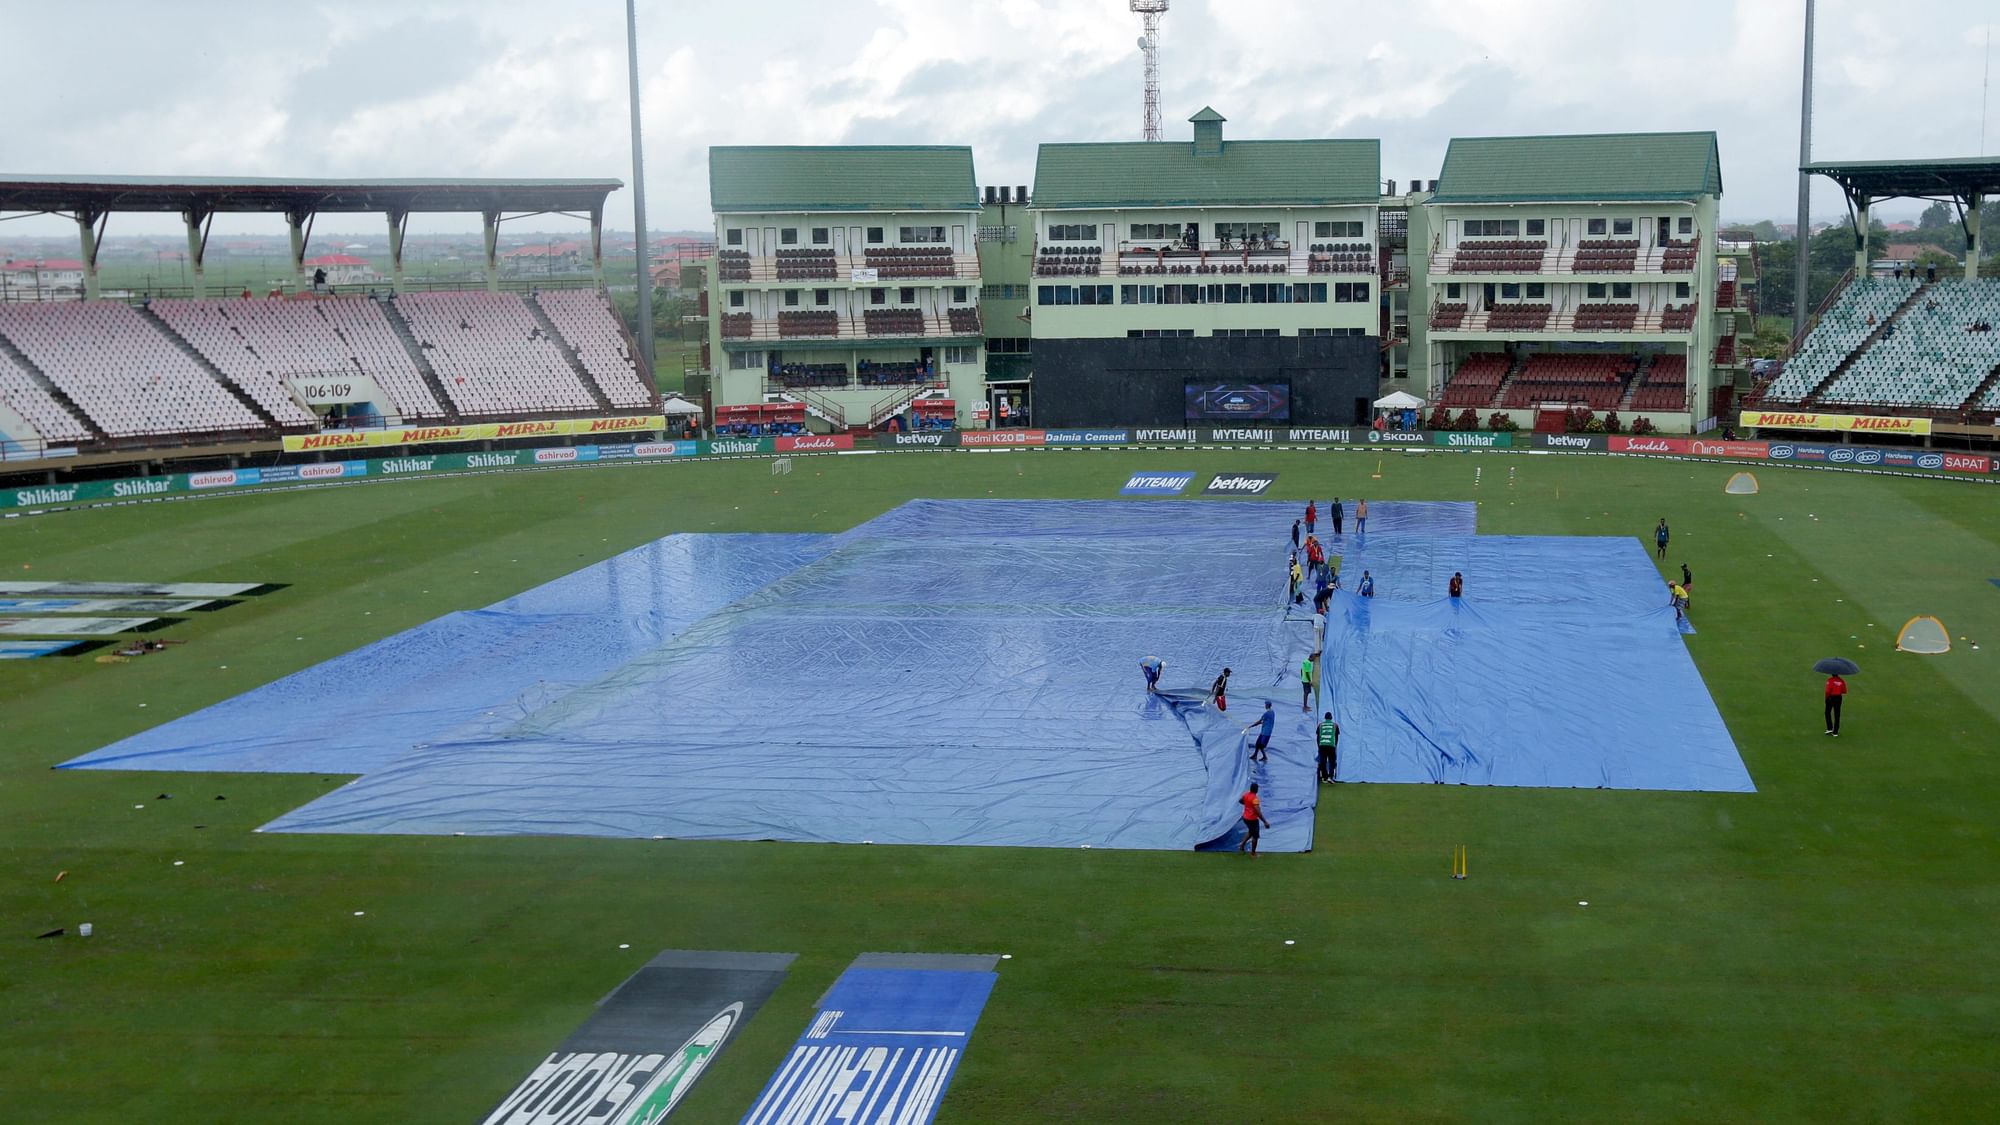 Rain stopped play in the first one-dayer between India and the West Indies after the home side scored 9 for no loss in 5.4 overs.